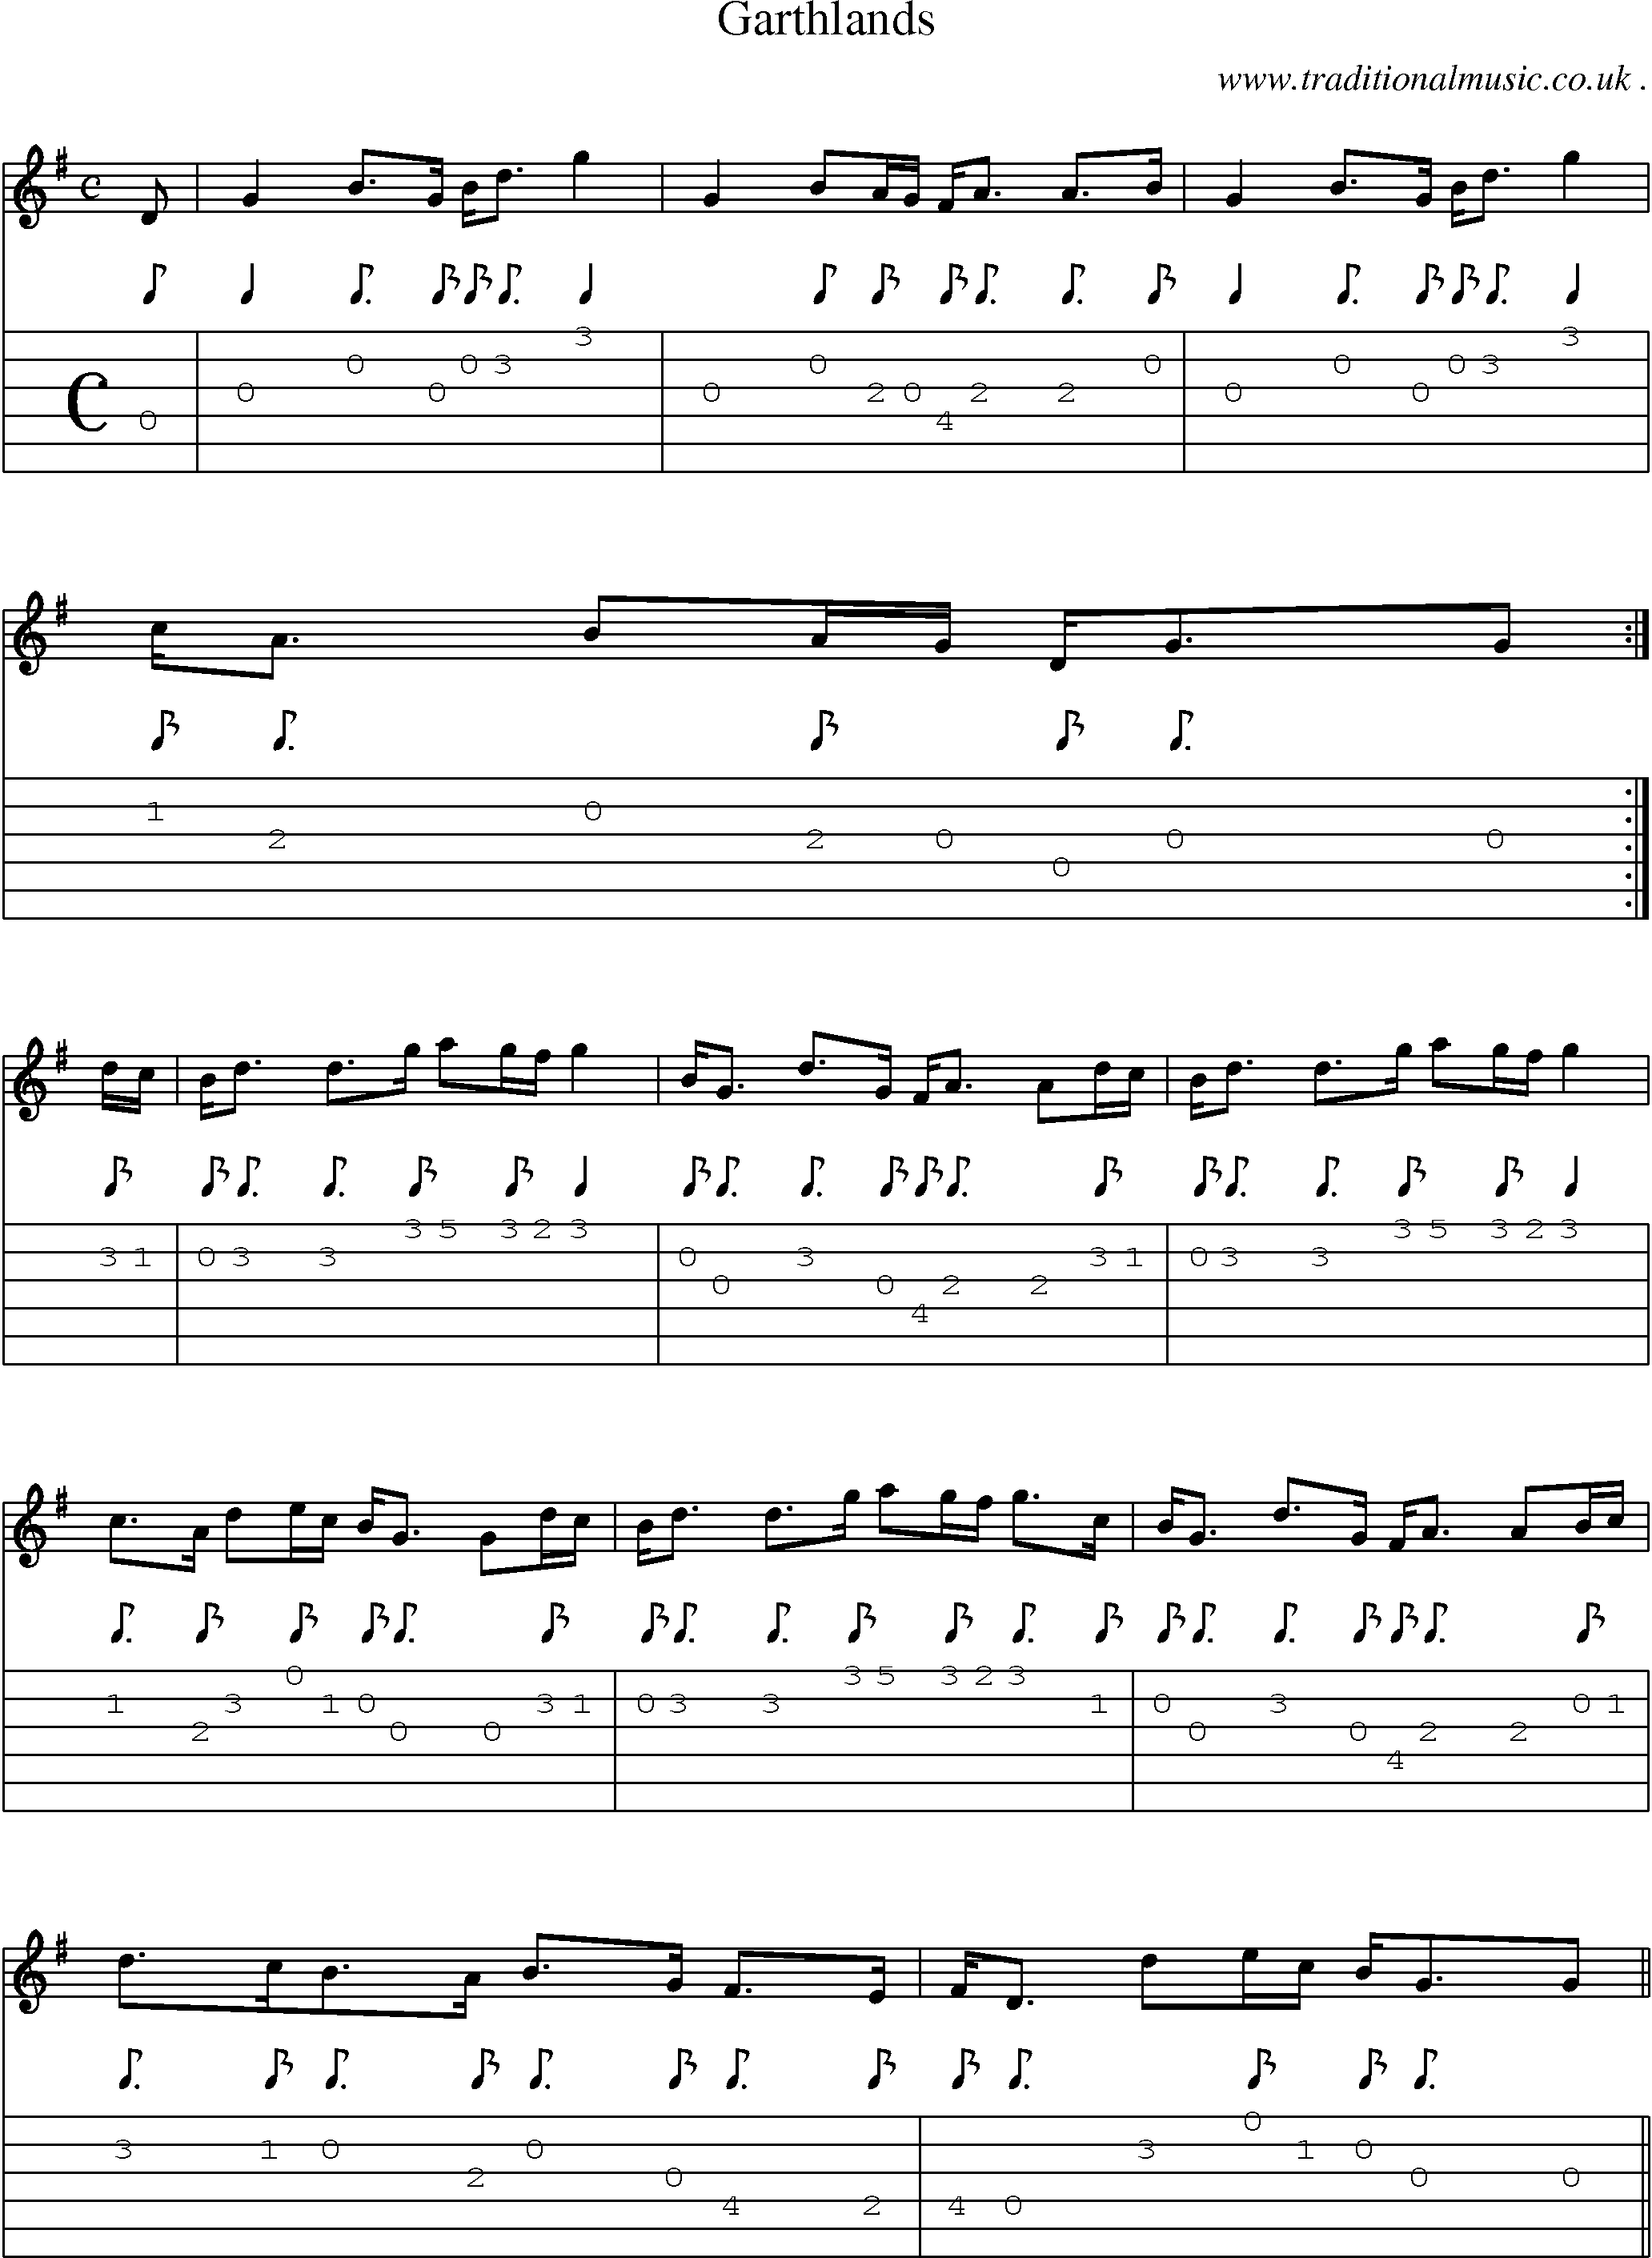 Sheet-music  score, Chords and Guitar Tabs for Garthlands